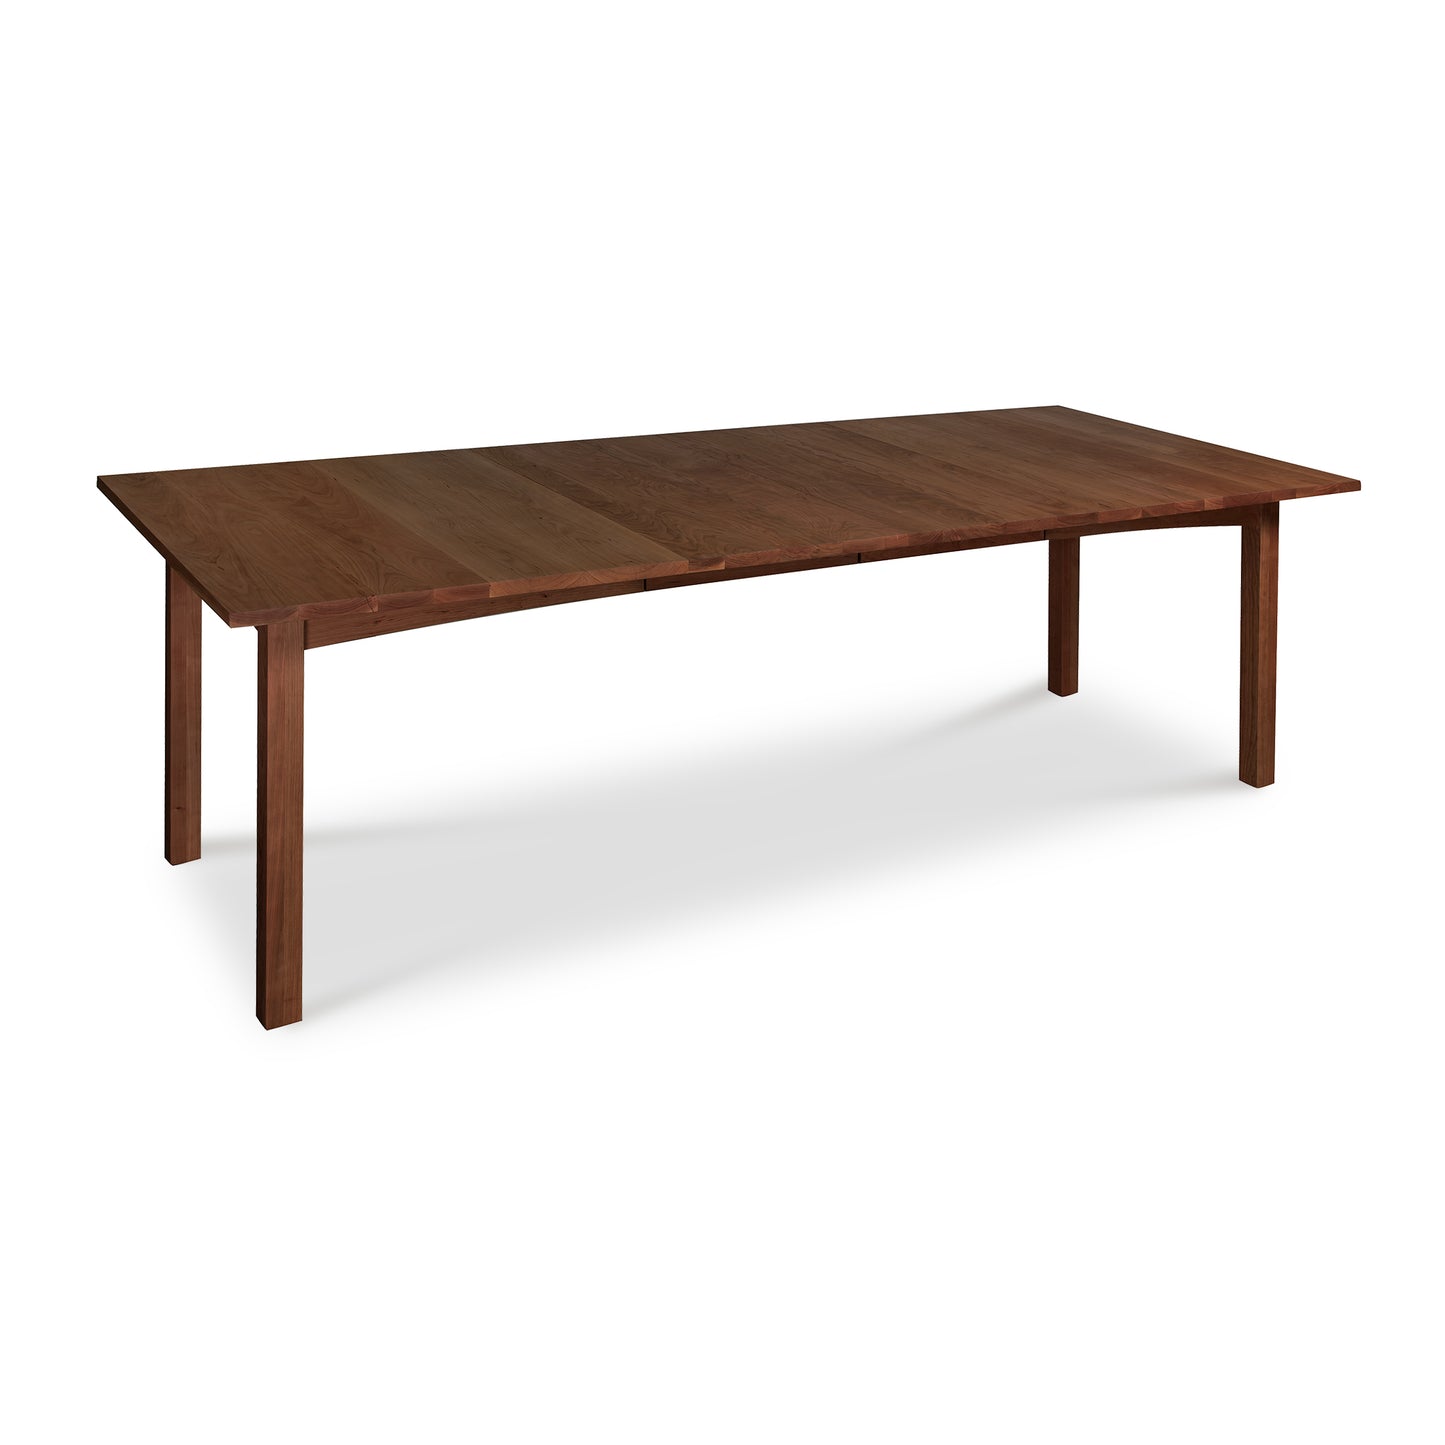 A solid woods Vermont Furniture Designs Burlington Shaker Extension Dining Table in a dining room setting, against a white background.